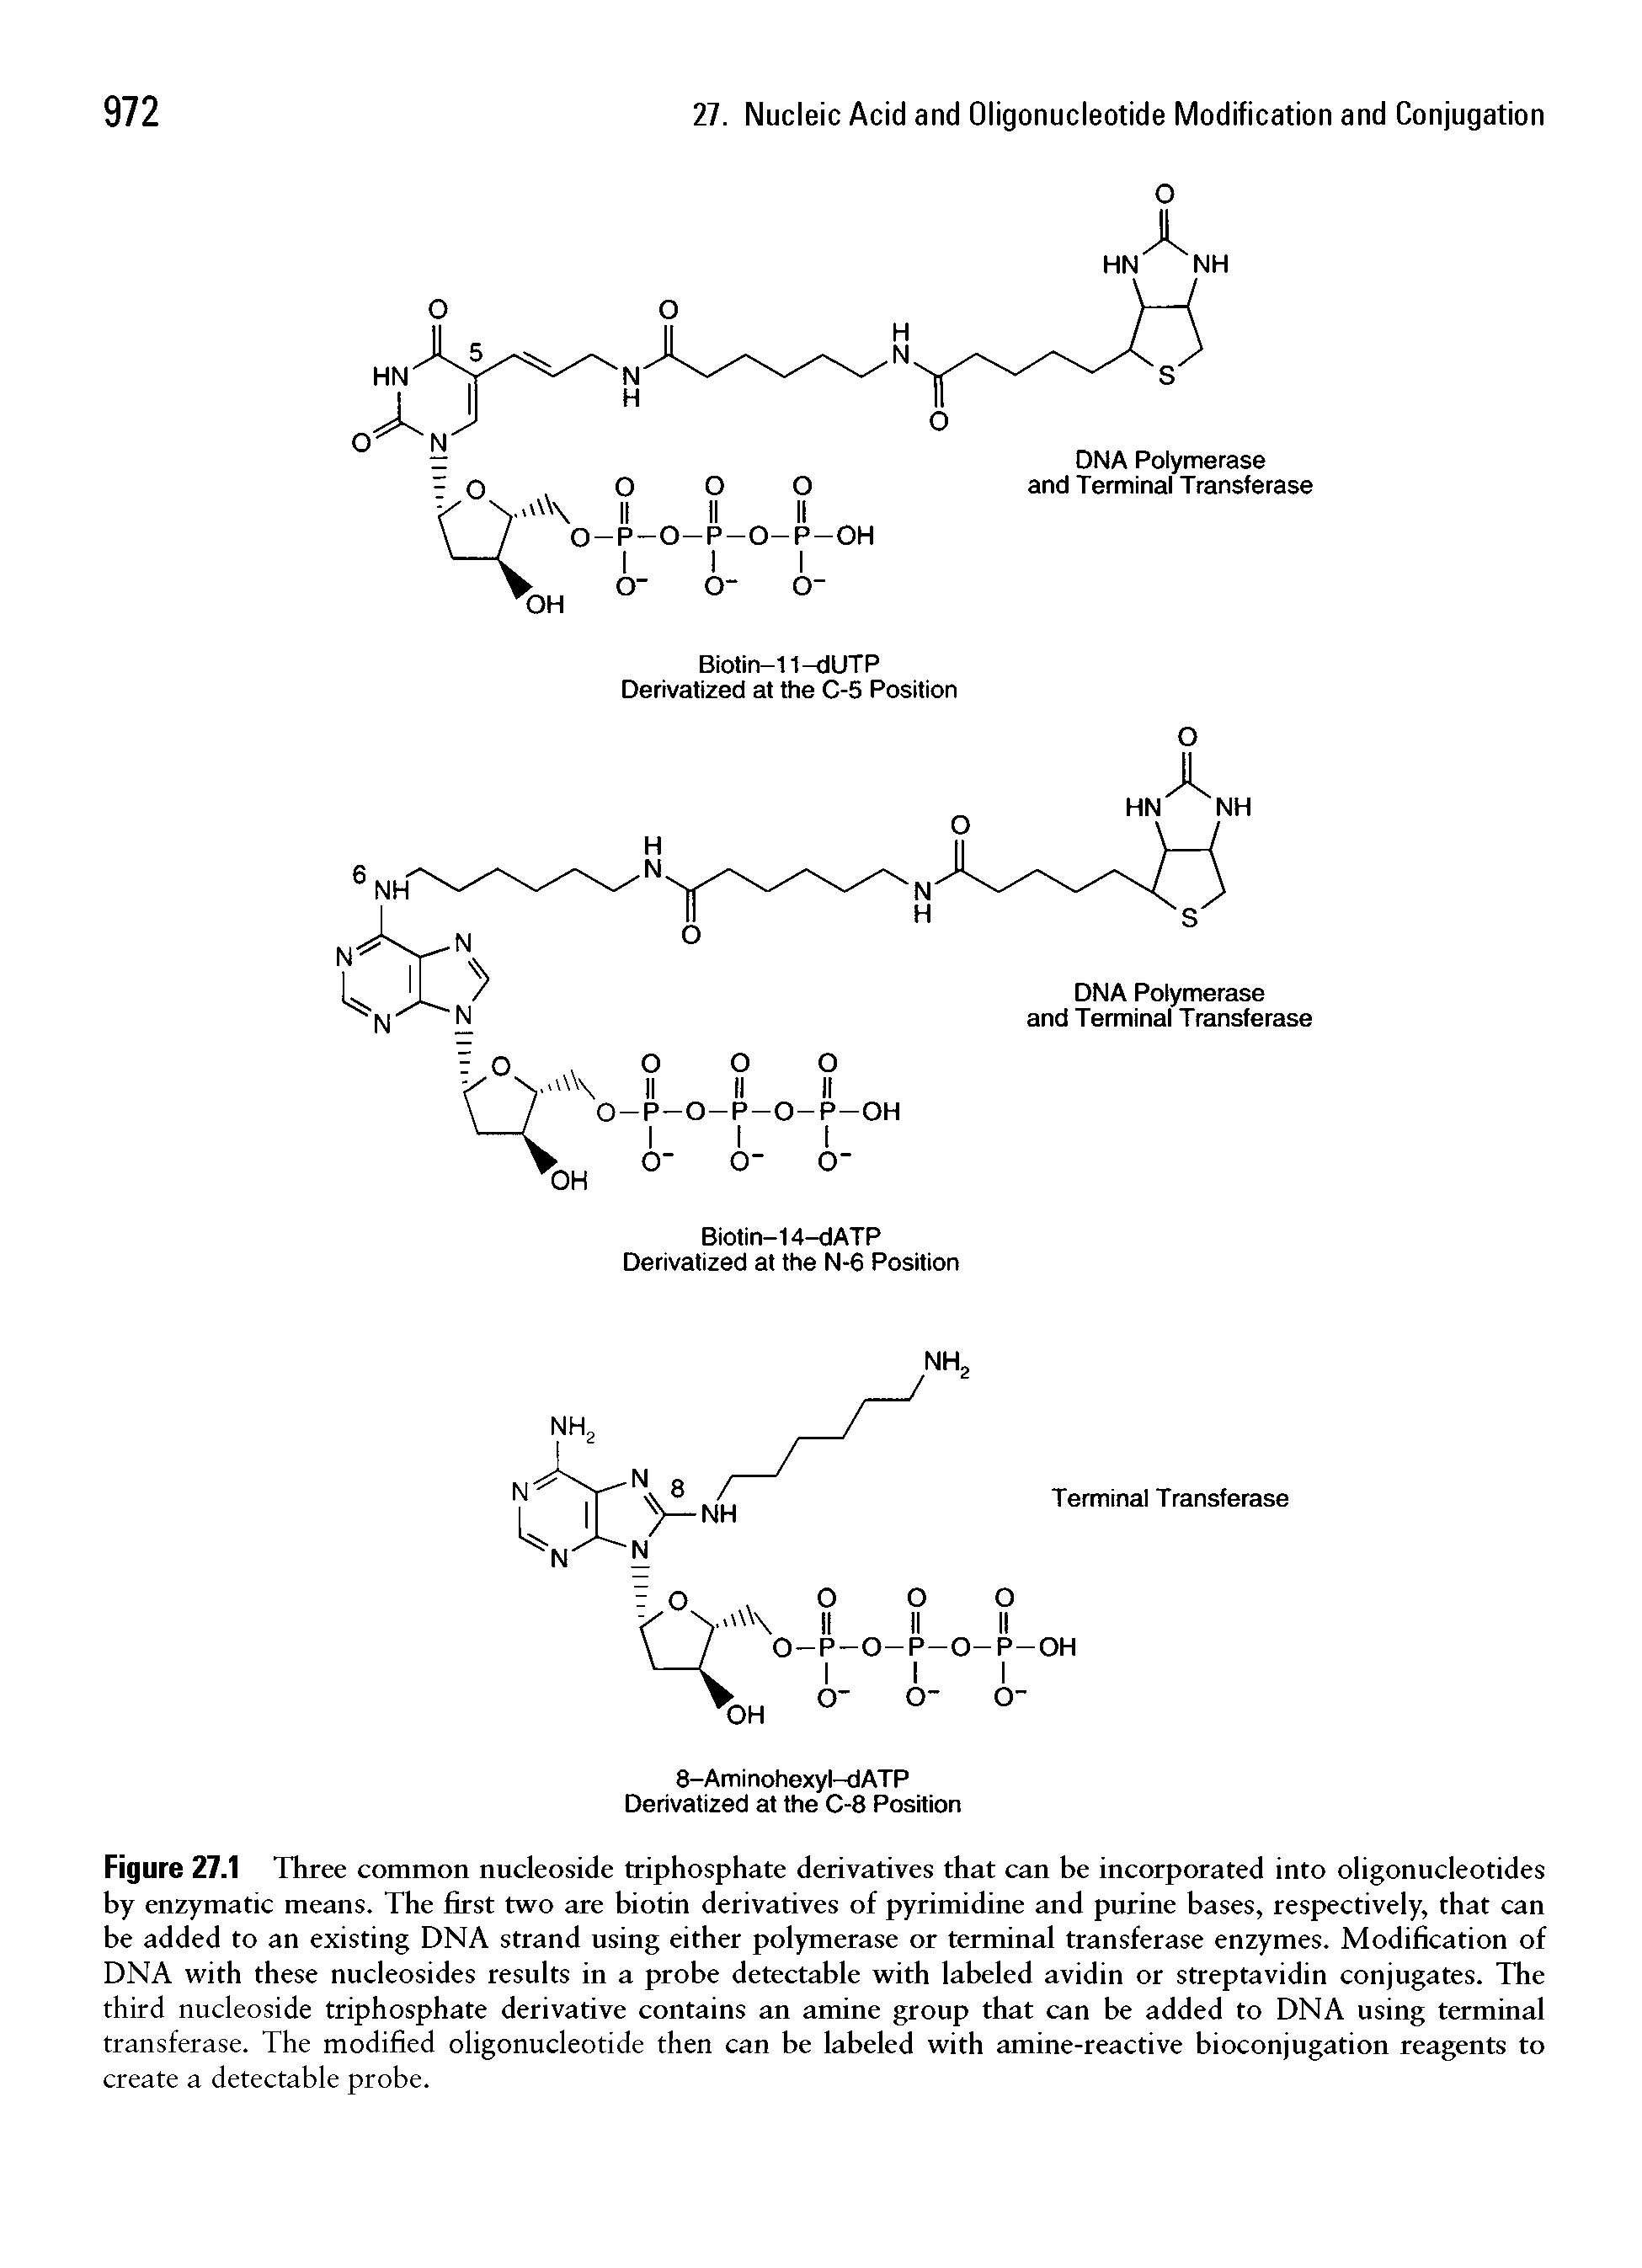 Figure 27.1 Three common nucleoside triphosphate derivatives that can be incorporated into oligonucleotides by enzymatic means. The first two are biotin derivatives of pyrimidine and purine bases, respectively, that can be added to an existing DNA strand using either polymerase or terminal transferase enzymes. Modification of DNA with these nucleosides results in a probe detectable with labeled avidin or streptavidin conjugates. The third nucleoside triphosphate derivative contains an amine group that can be added to DNA using terminal transferase. The modified oligonucleotide then can be labeled with amine-reactive bioconjugation reagents to create a detectable probe.